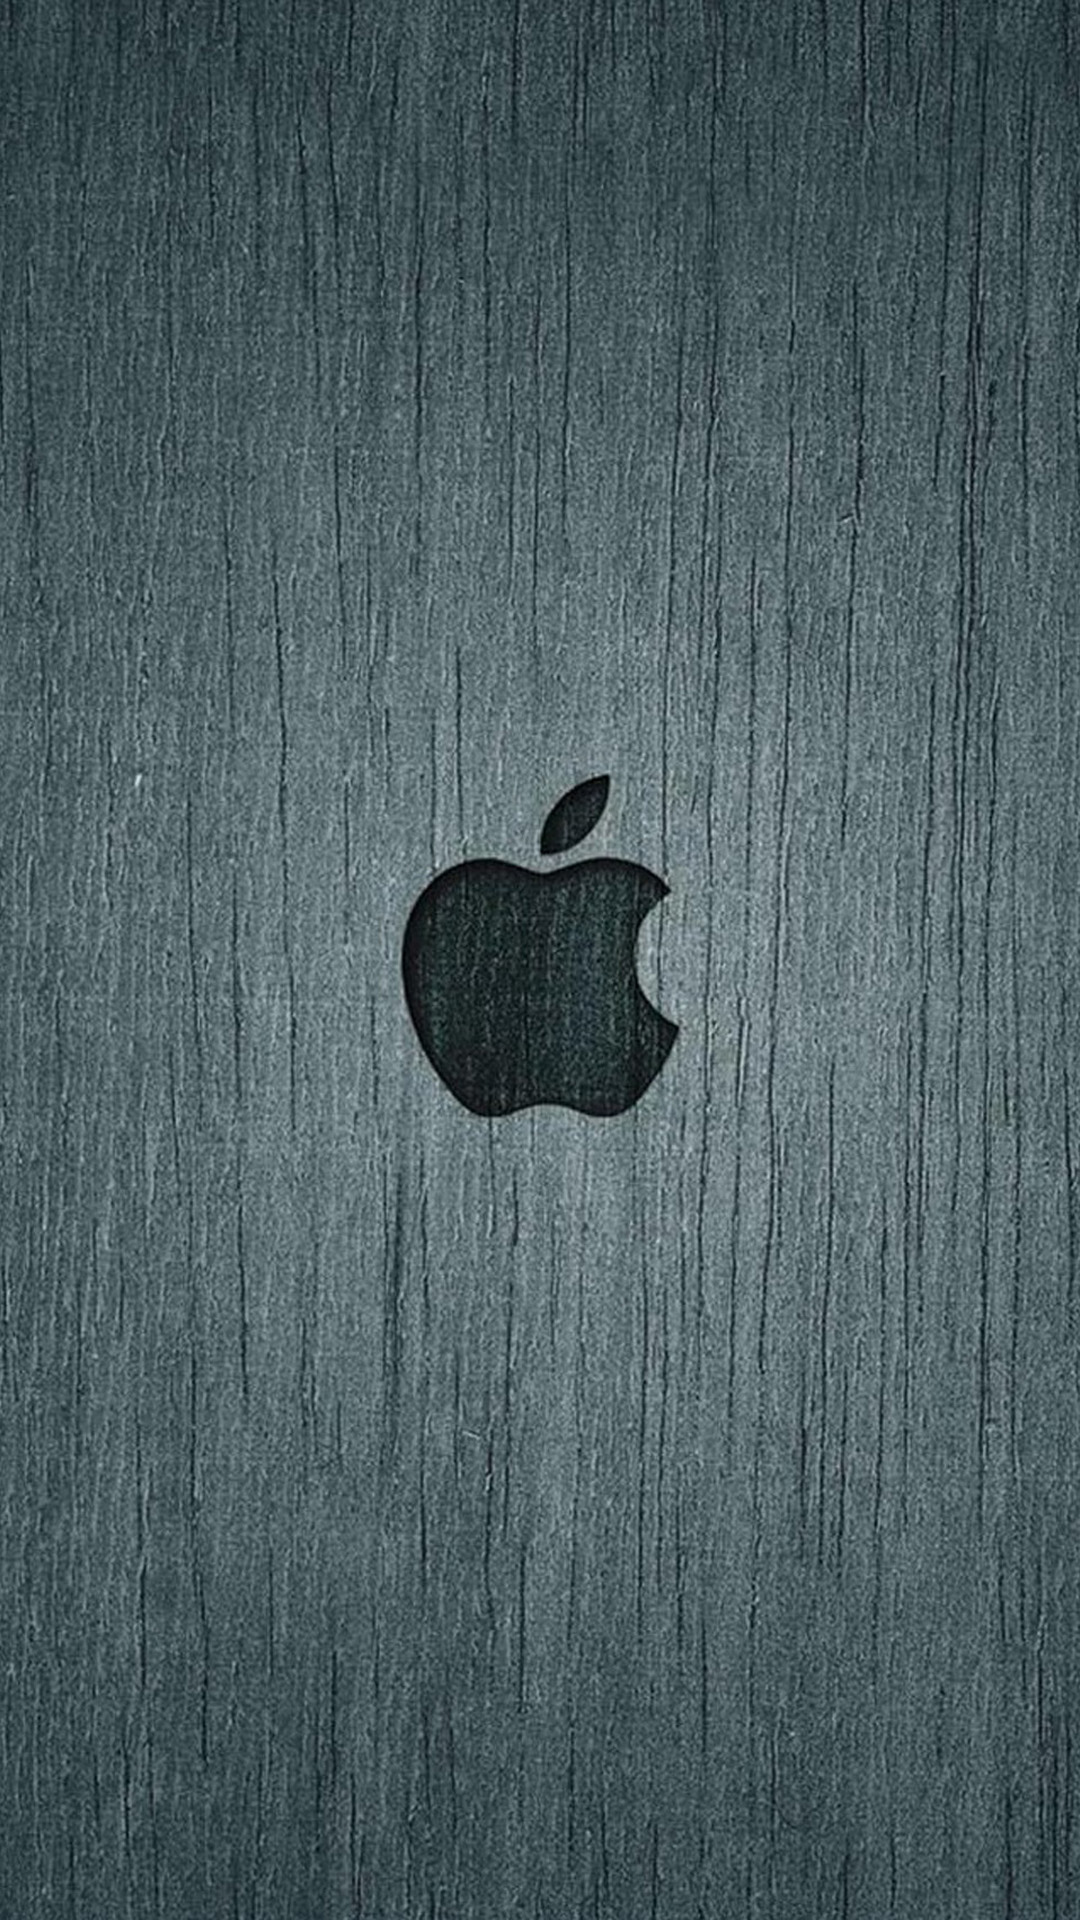 Free Download Apple Wallpapers For Iphone 6 Plus 56 Iphone 6 Plus Wallpaper 1080x19 For Your Desktop Mobile Tablet Explore 46 Apple Iphone 6 Plus Wallpaper Iphone 6s Plus